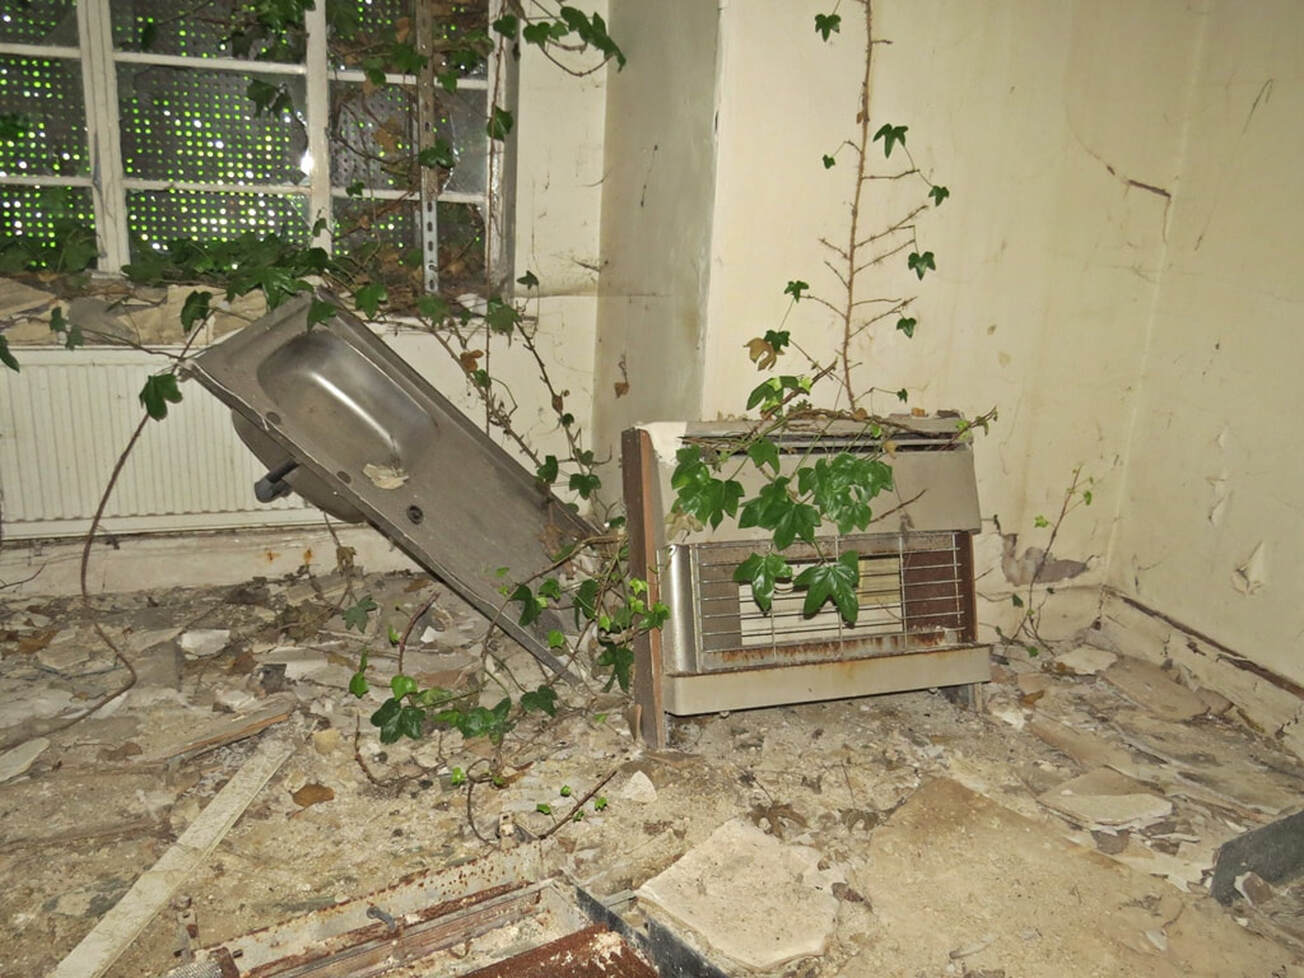 Abandoned gas fire and kitchen sink in derelict overgrown house at RAF Uxbridge in NW London